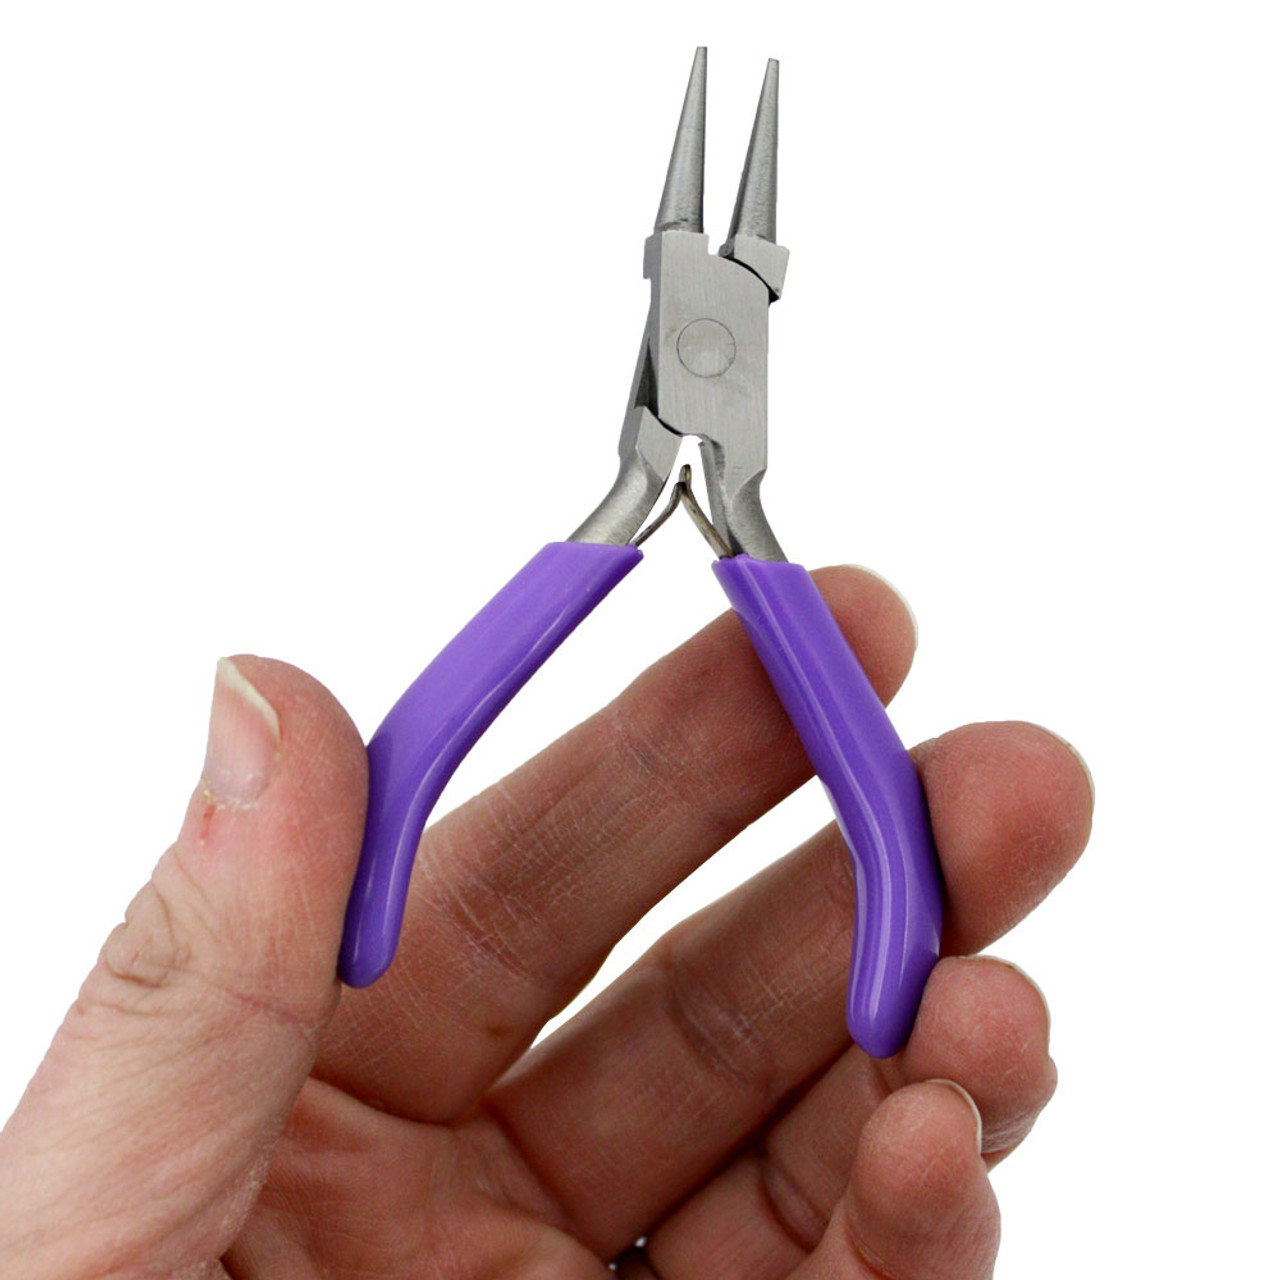 Miniature Pocket Plier, Chain Nose, 3 Inches